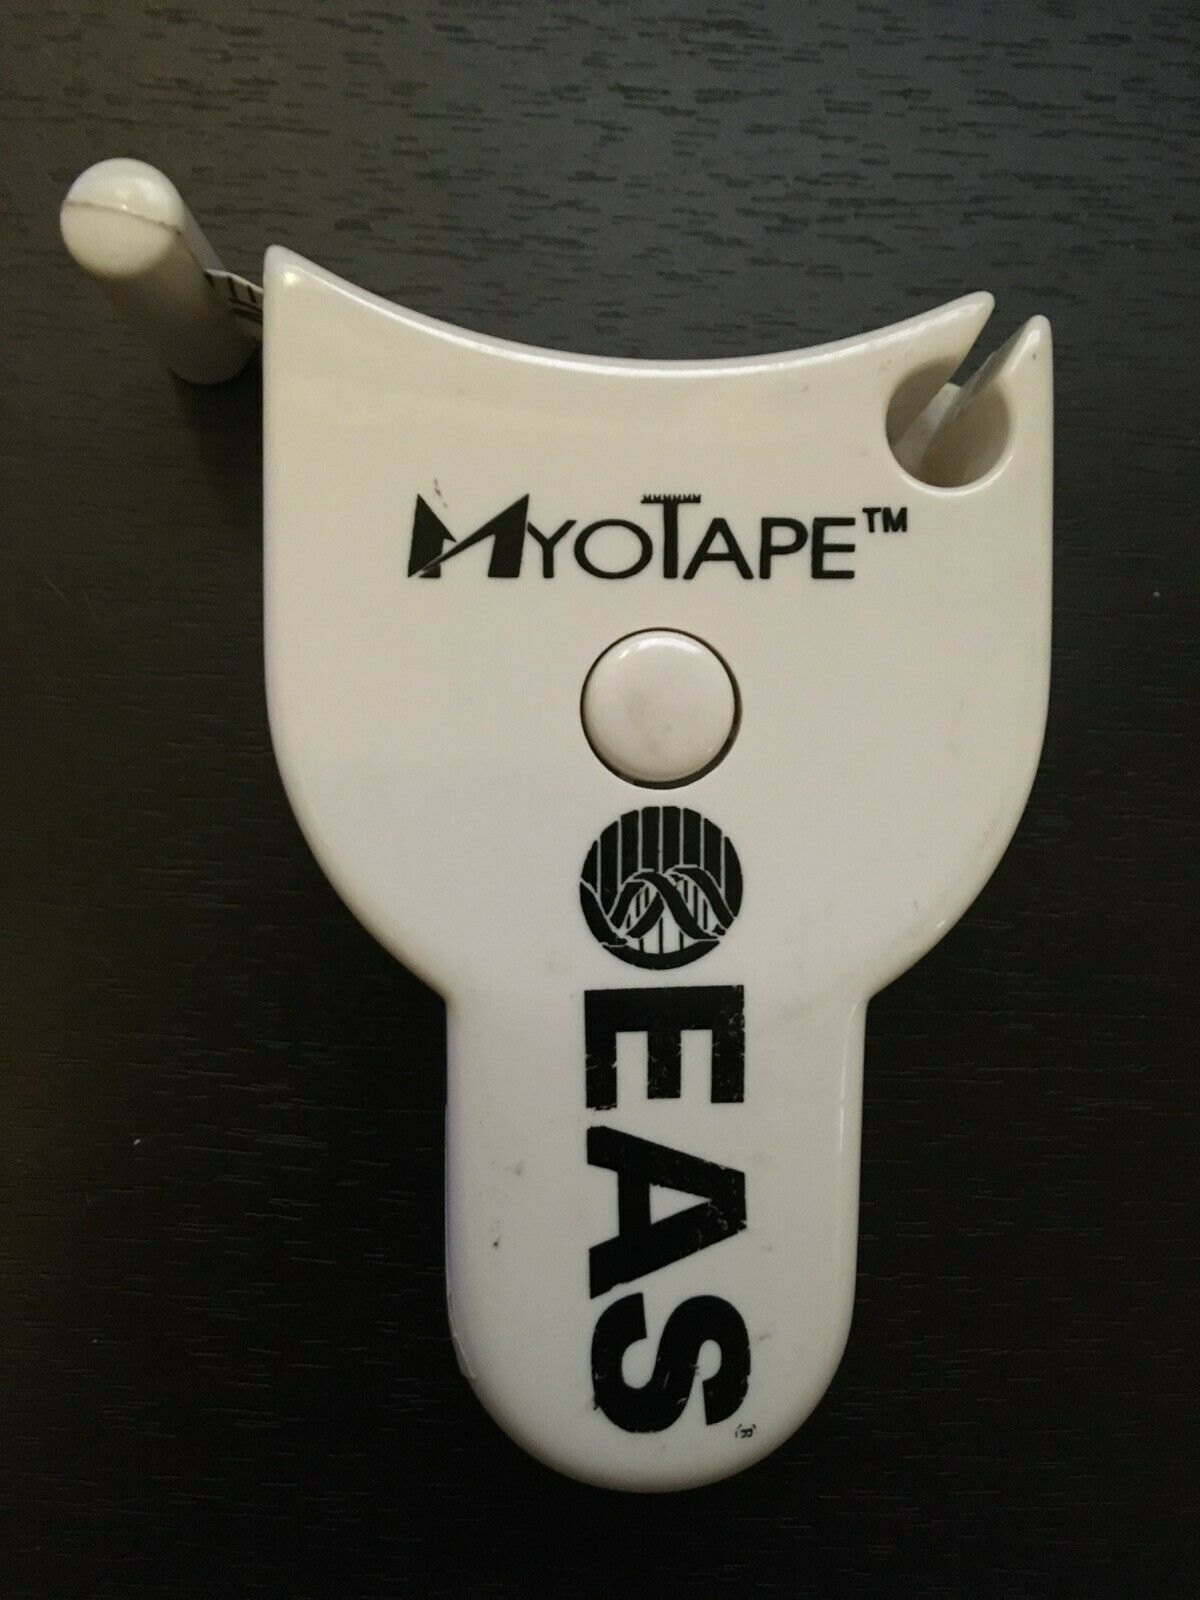 Myotape Body Tape Measure By Accufitness Personal Training Body Measurement